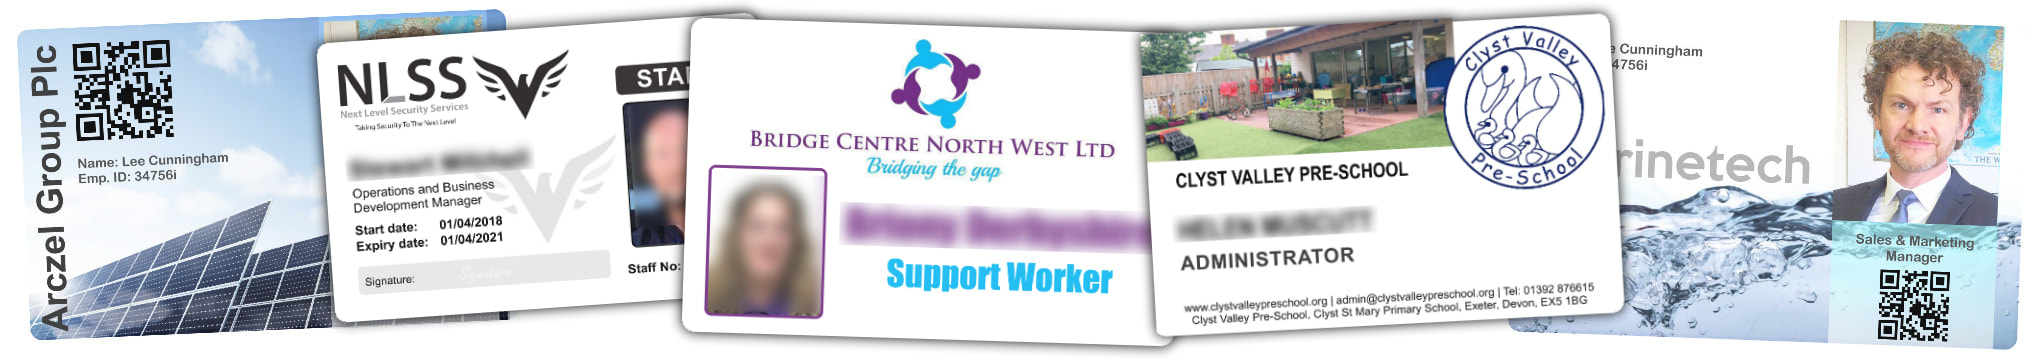 Warrington examples of staff photo ID cards | samples of employee Identity card printing | Workers ID cards printed in 